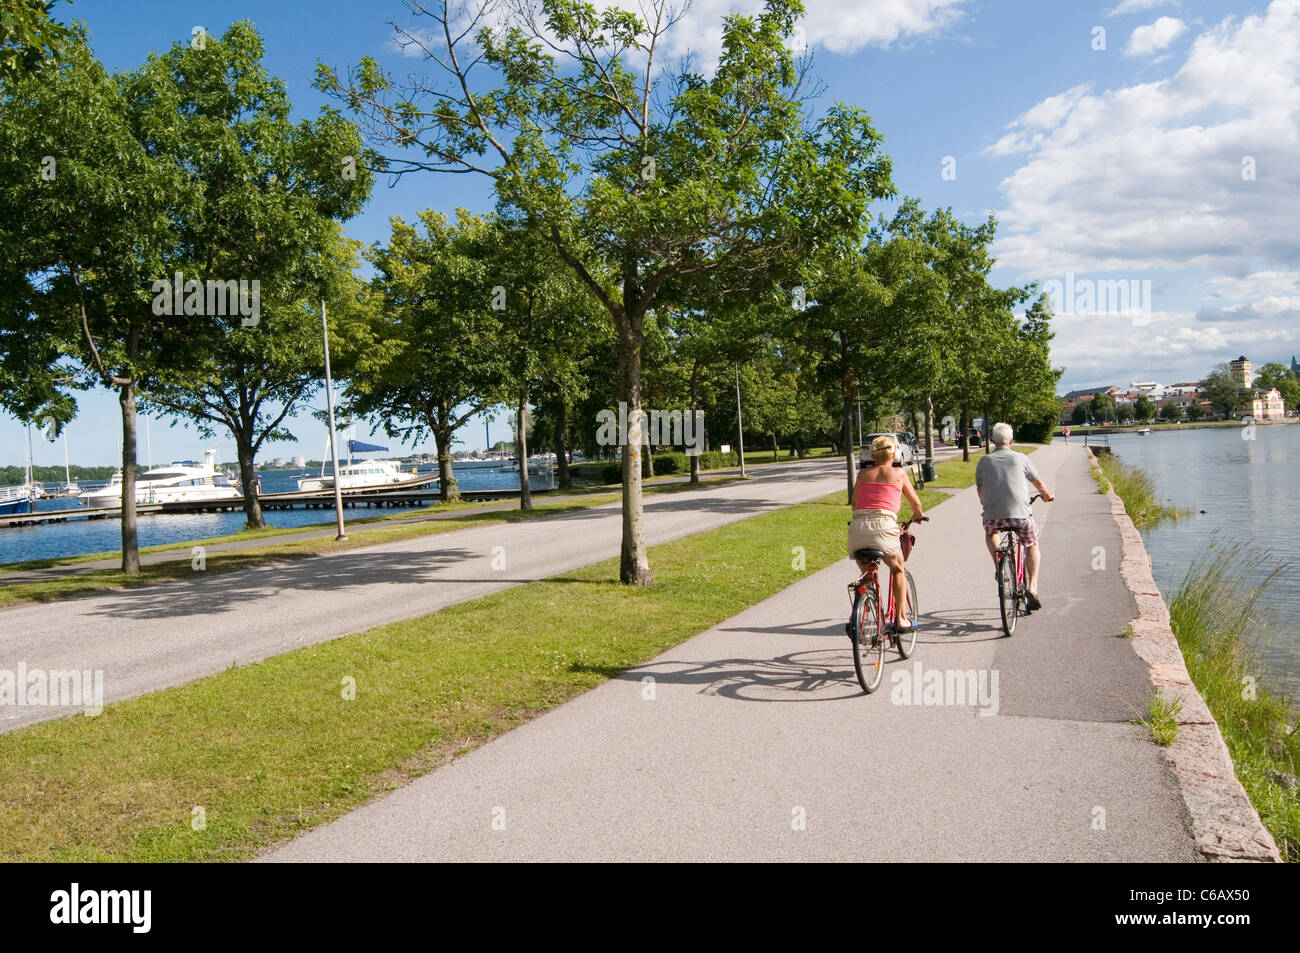 Västervik sweden swedish town cycle path paths cyclepath cyclepaths bike cycle cycling ride riders path paths summer summertime Stock Photo